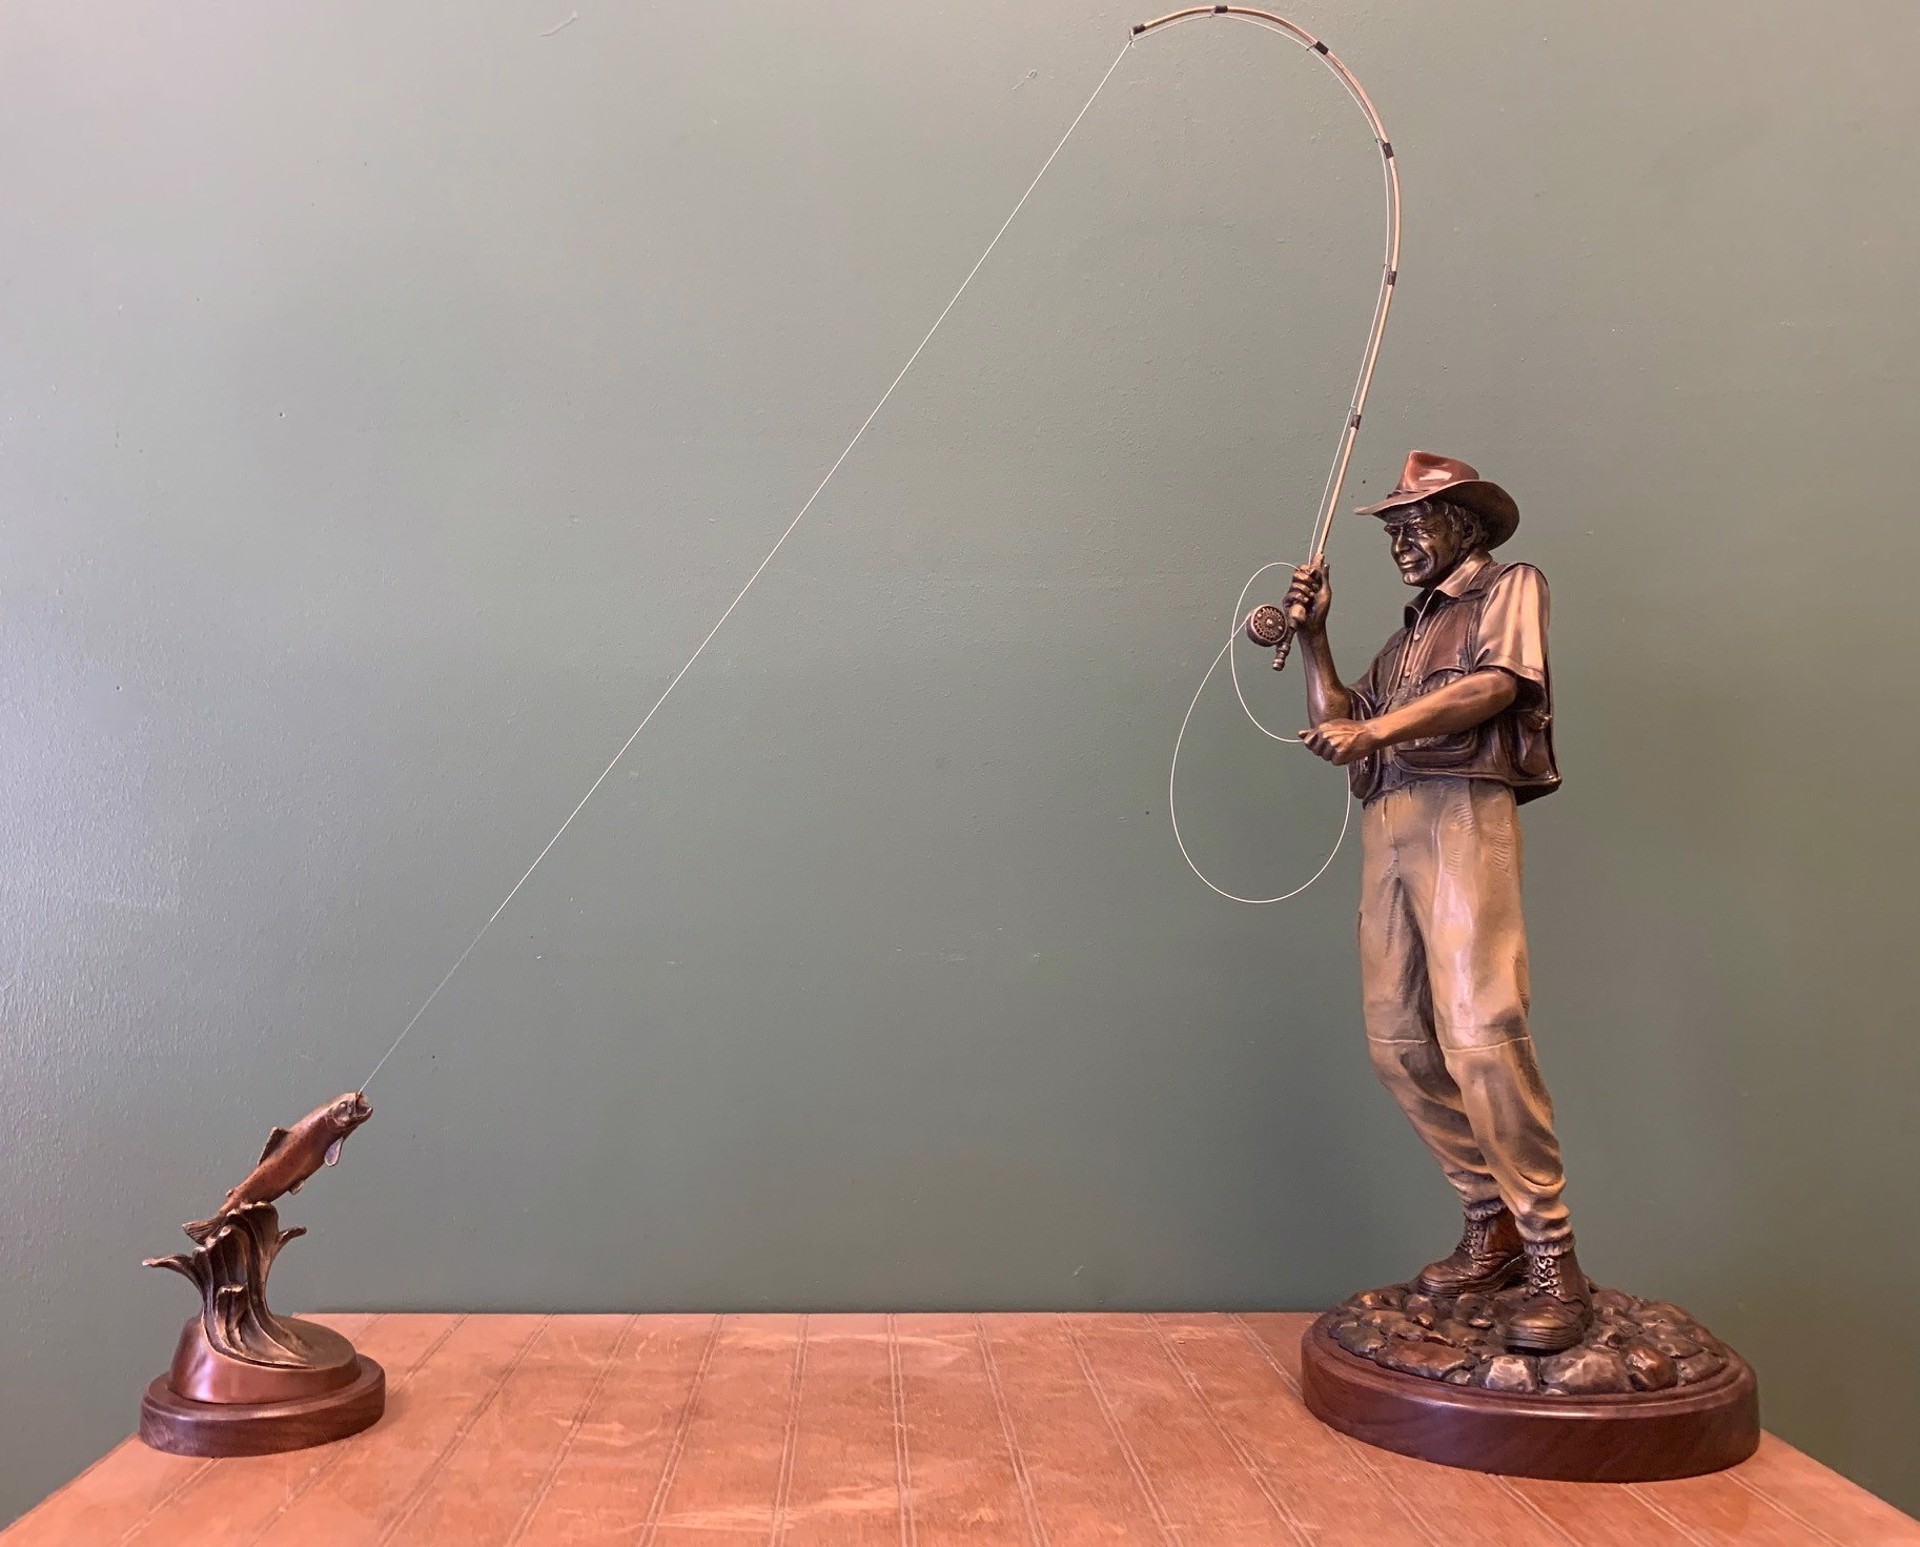 Hooked (Small) by George & Mark Lundeen